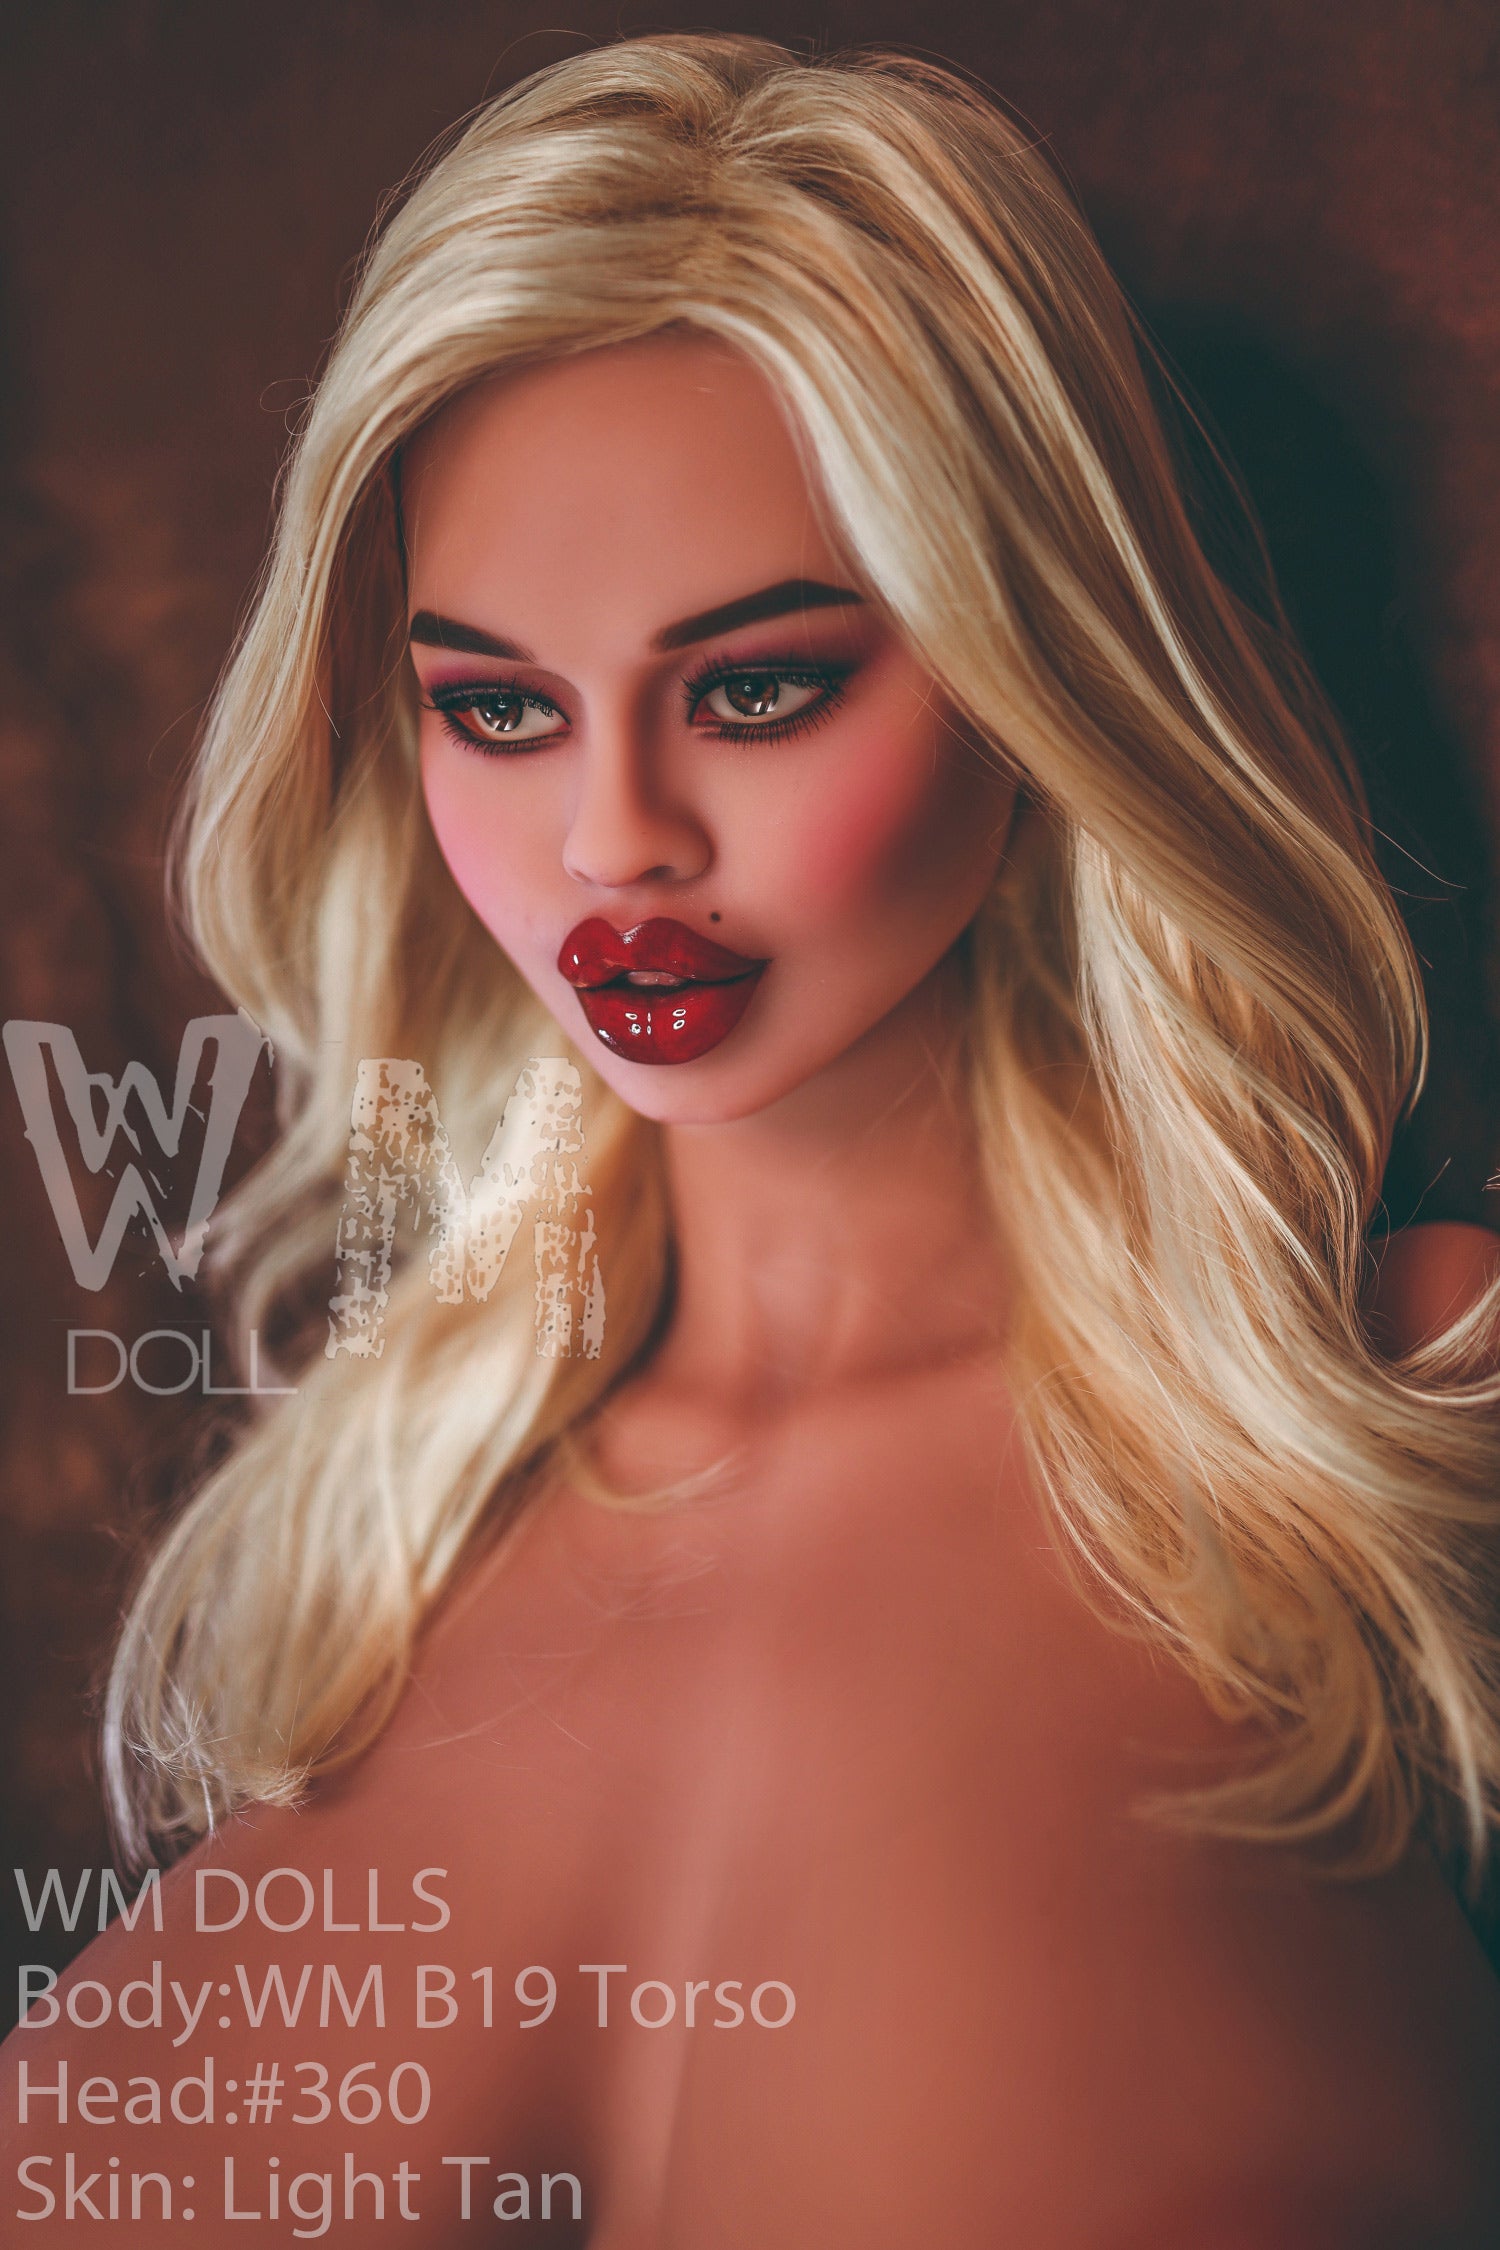 WM DOLL Pentrable Breast TORSO TPE - Hailey | Buy Sex Dolls at DOLLS ACTUALLY